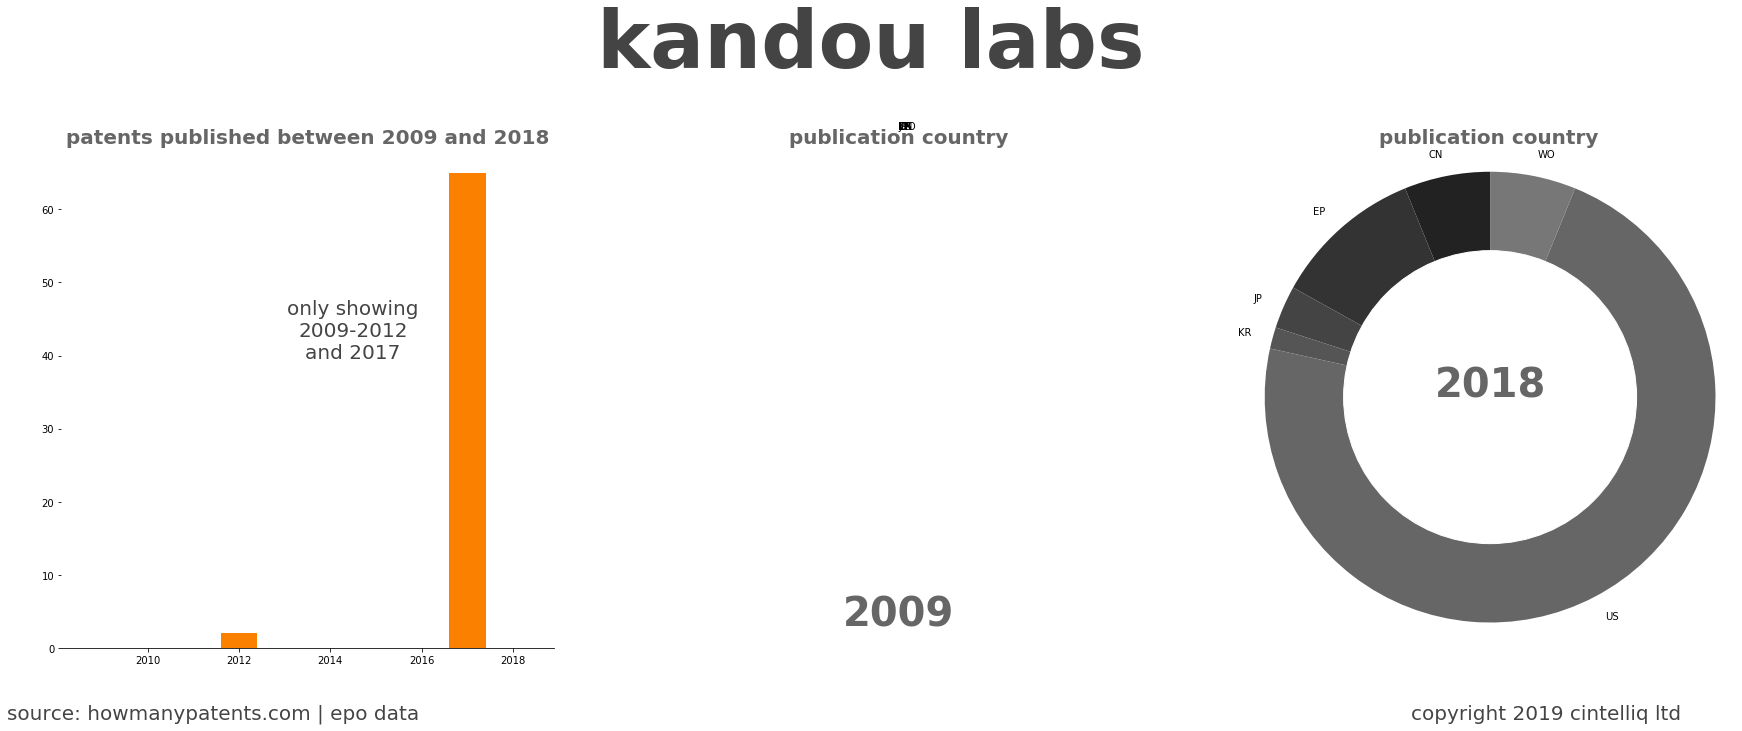 summary of patents for Kandou Labs